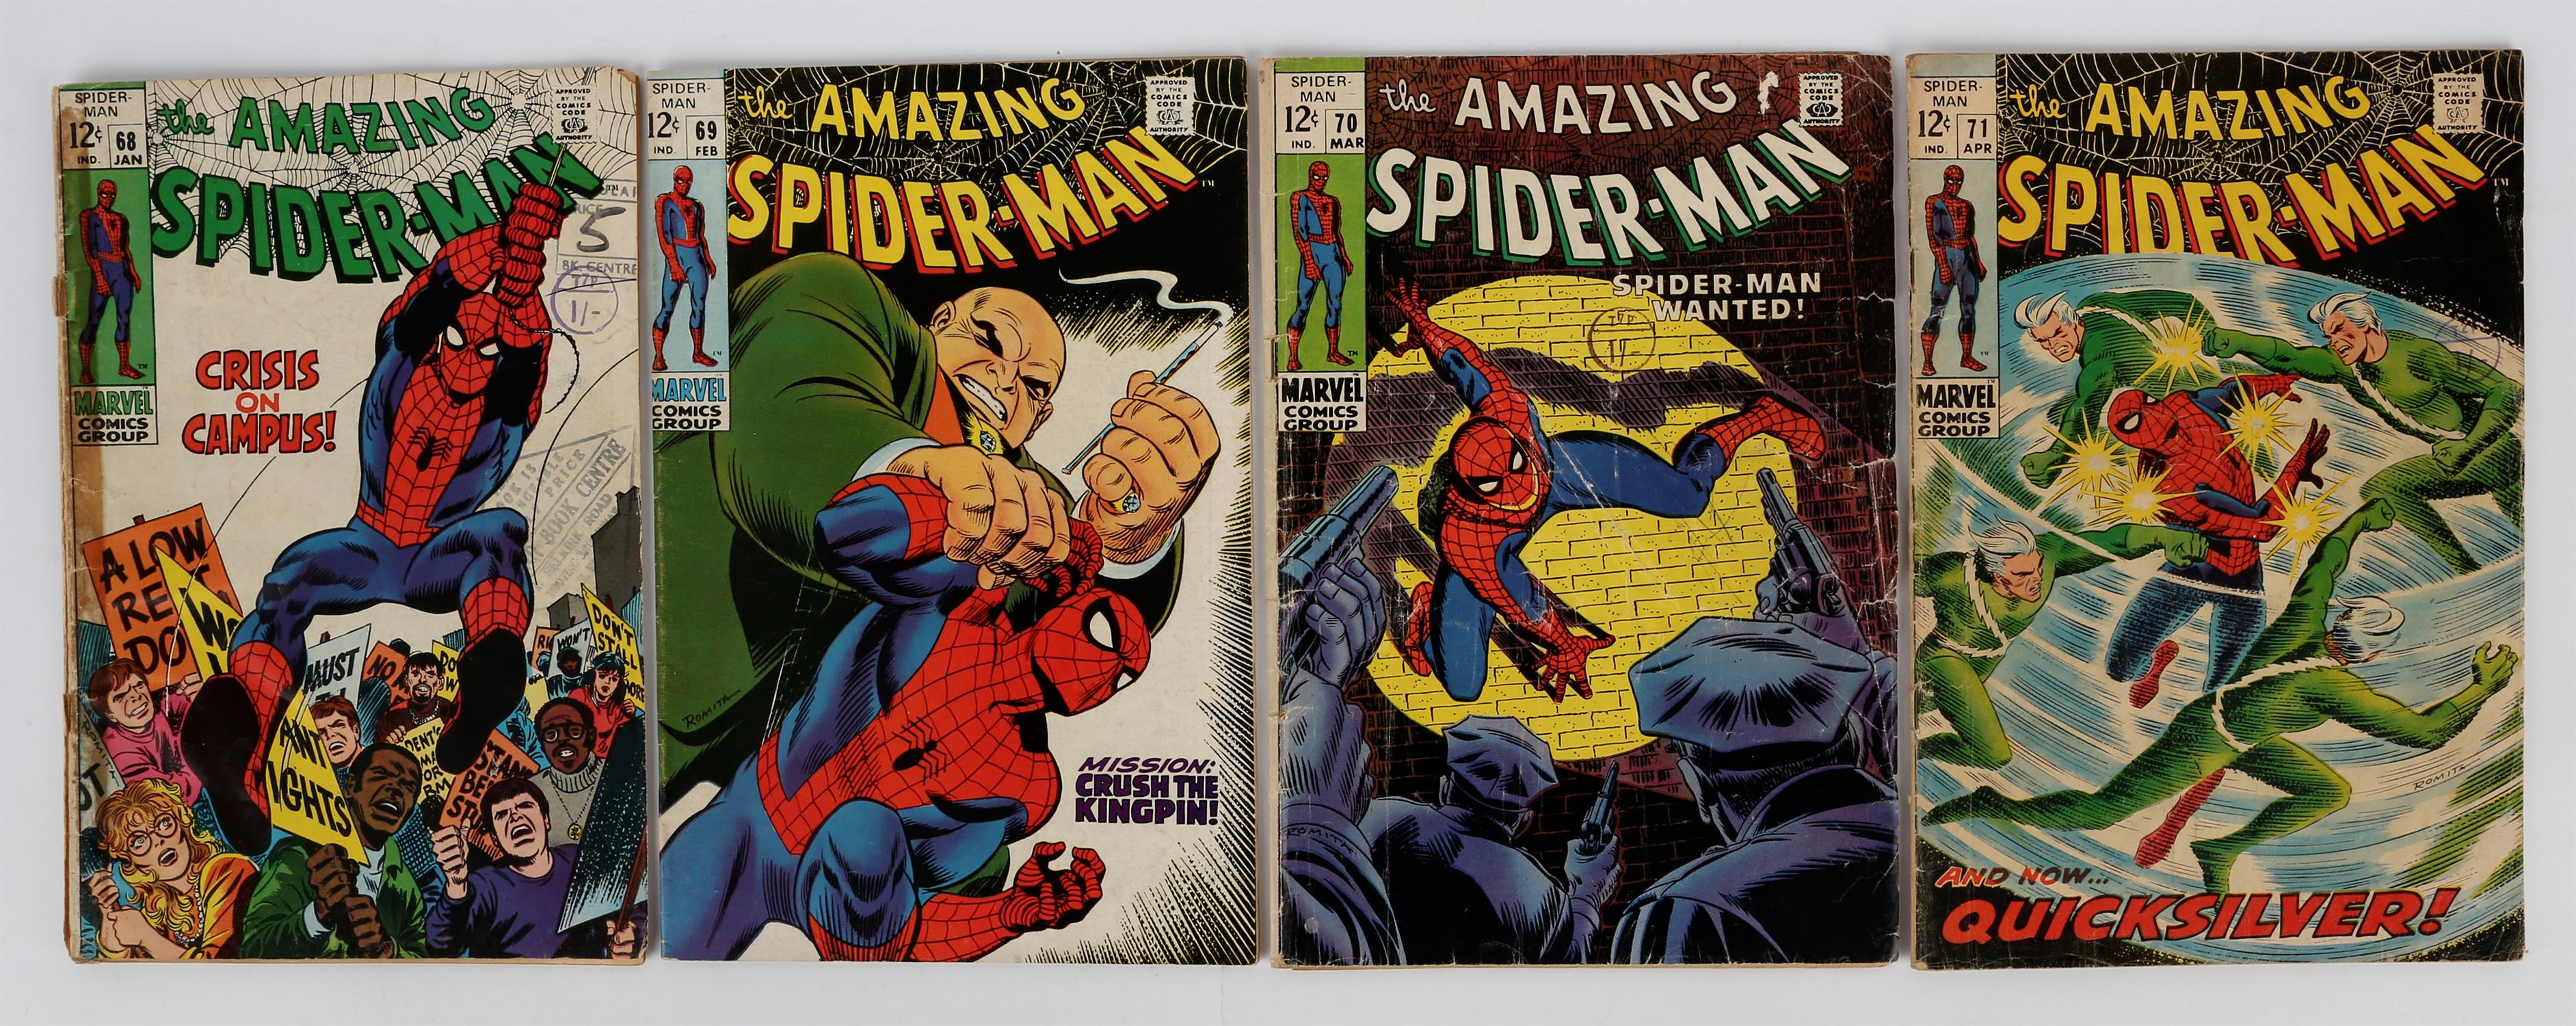 Marvel Comics: A group of the Amazing Spider-Man comics featuring notable issues (1969).